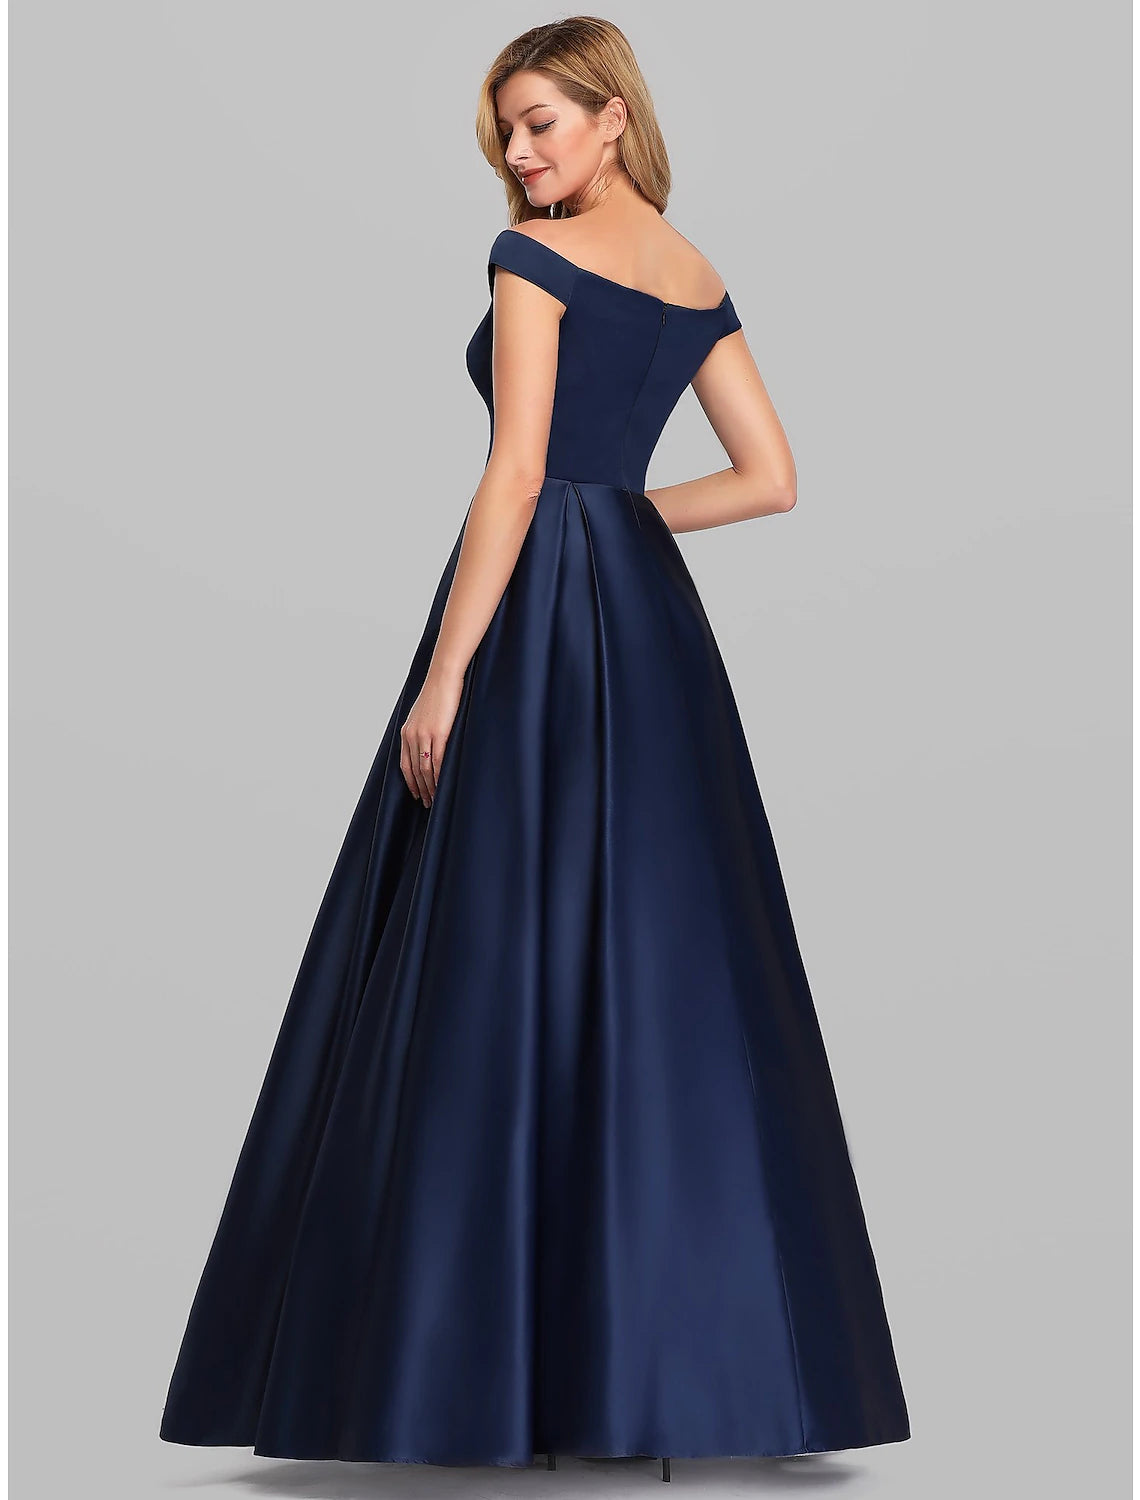 A-Line Evening Gown Elegant & Luxurious Dress Wedding Guest Floor Length Sleeveless Plunging Neck Satin with Ruched